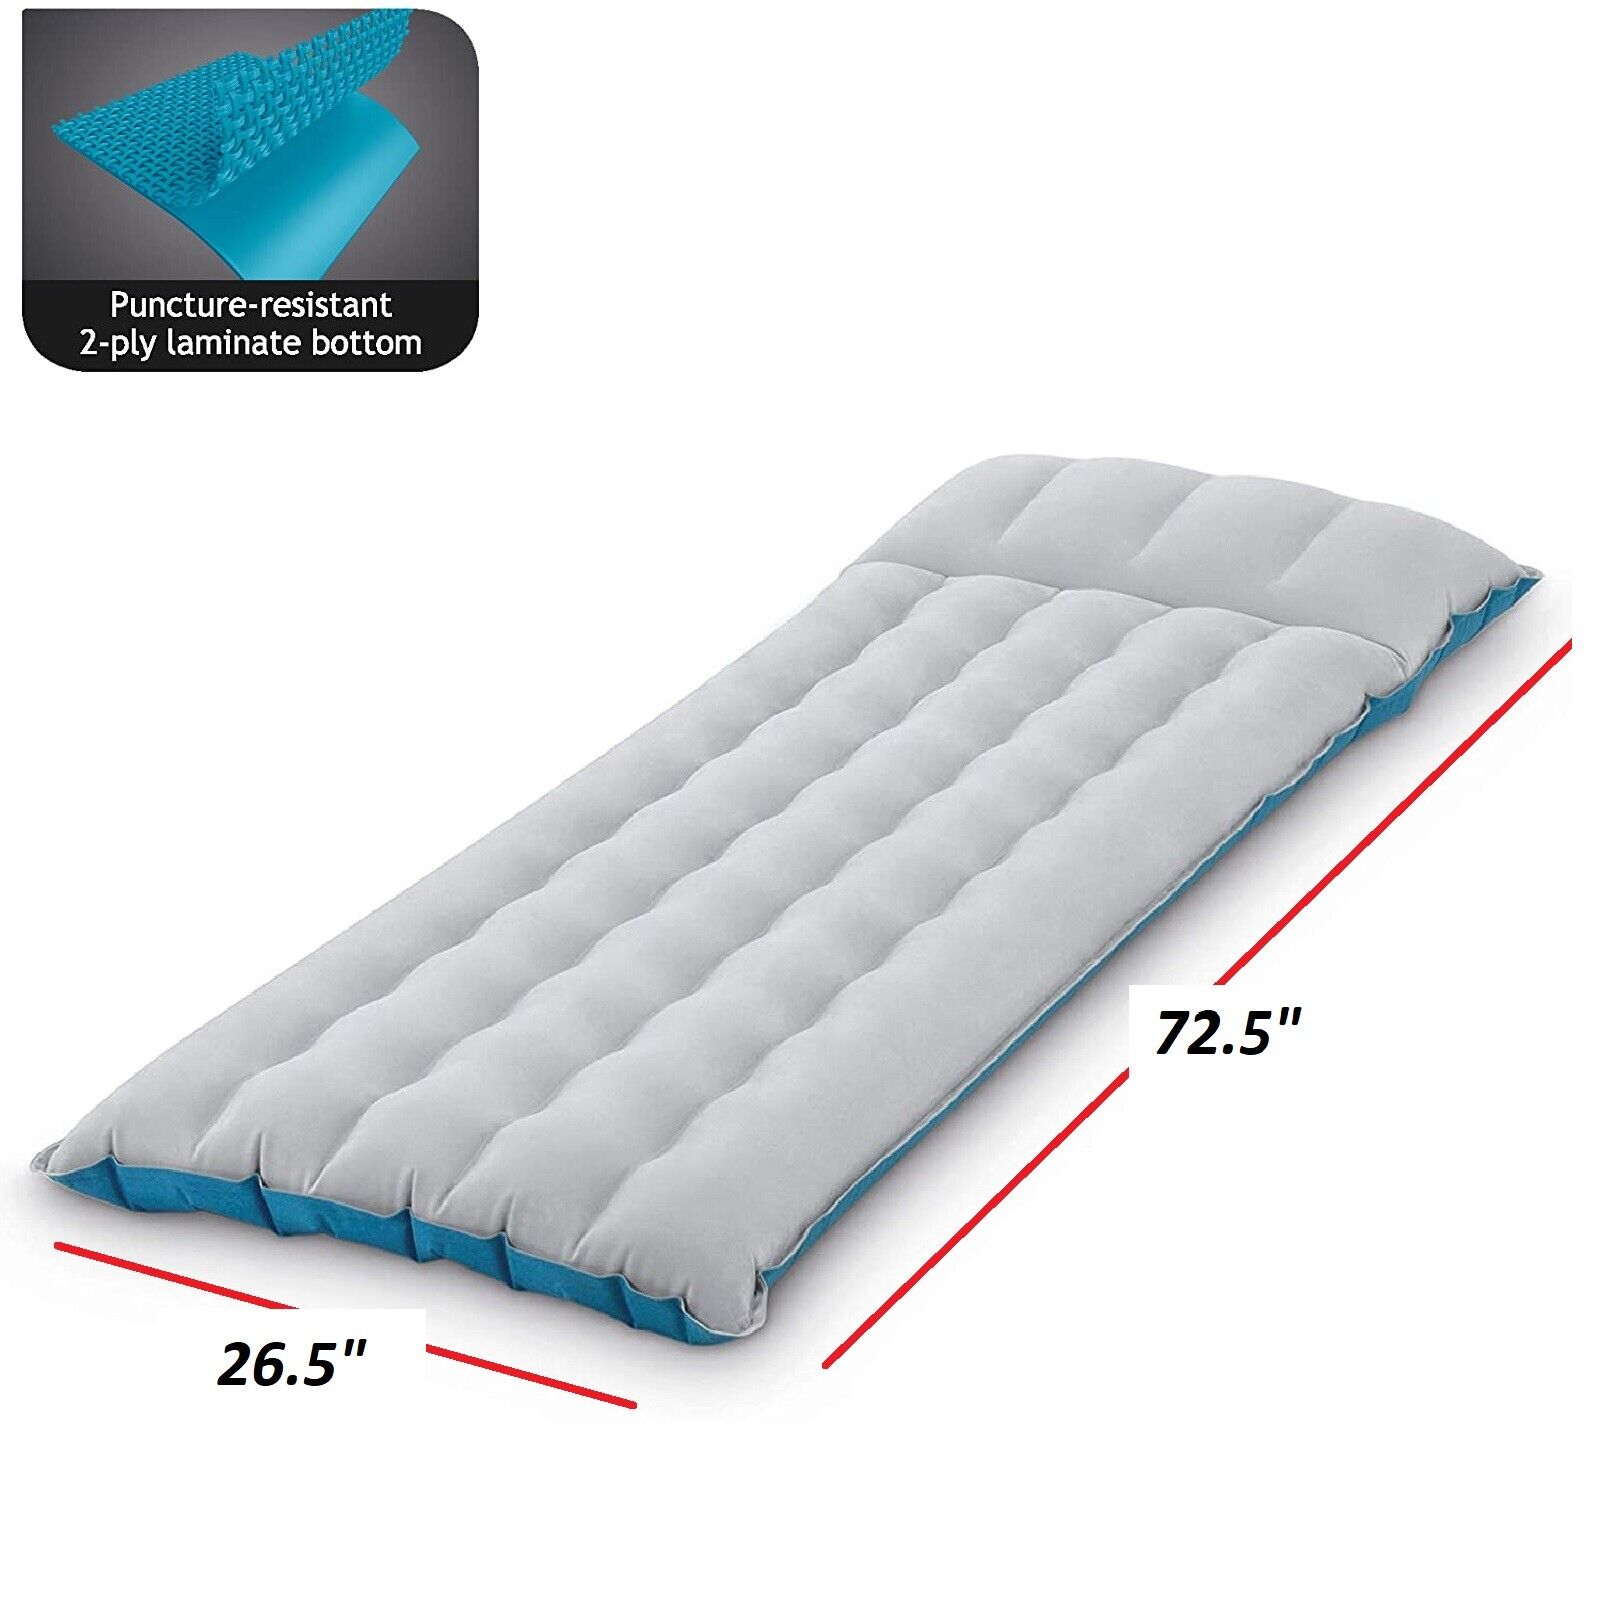 Intex Inflatable Airbed Camping, Twin Size Folding Air Beds